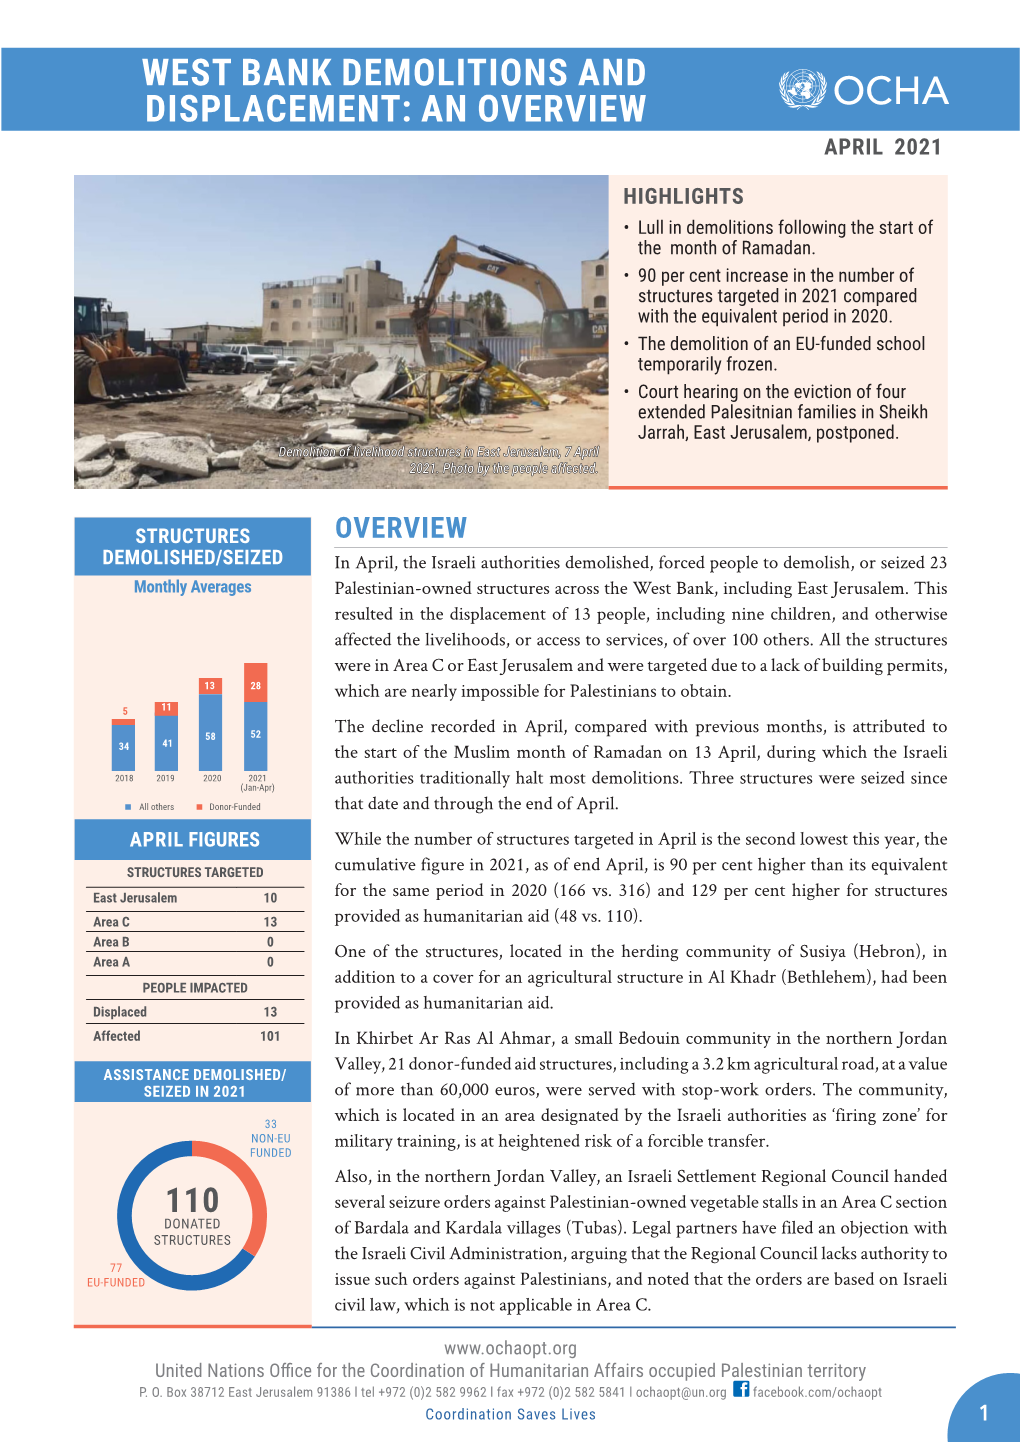 West Bank Demolitions and Displacement: an Overview April 2021